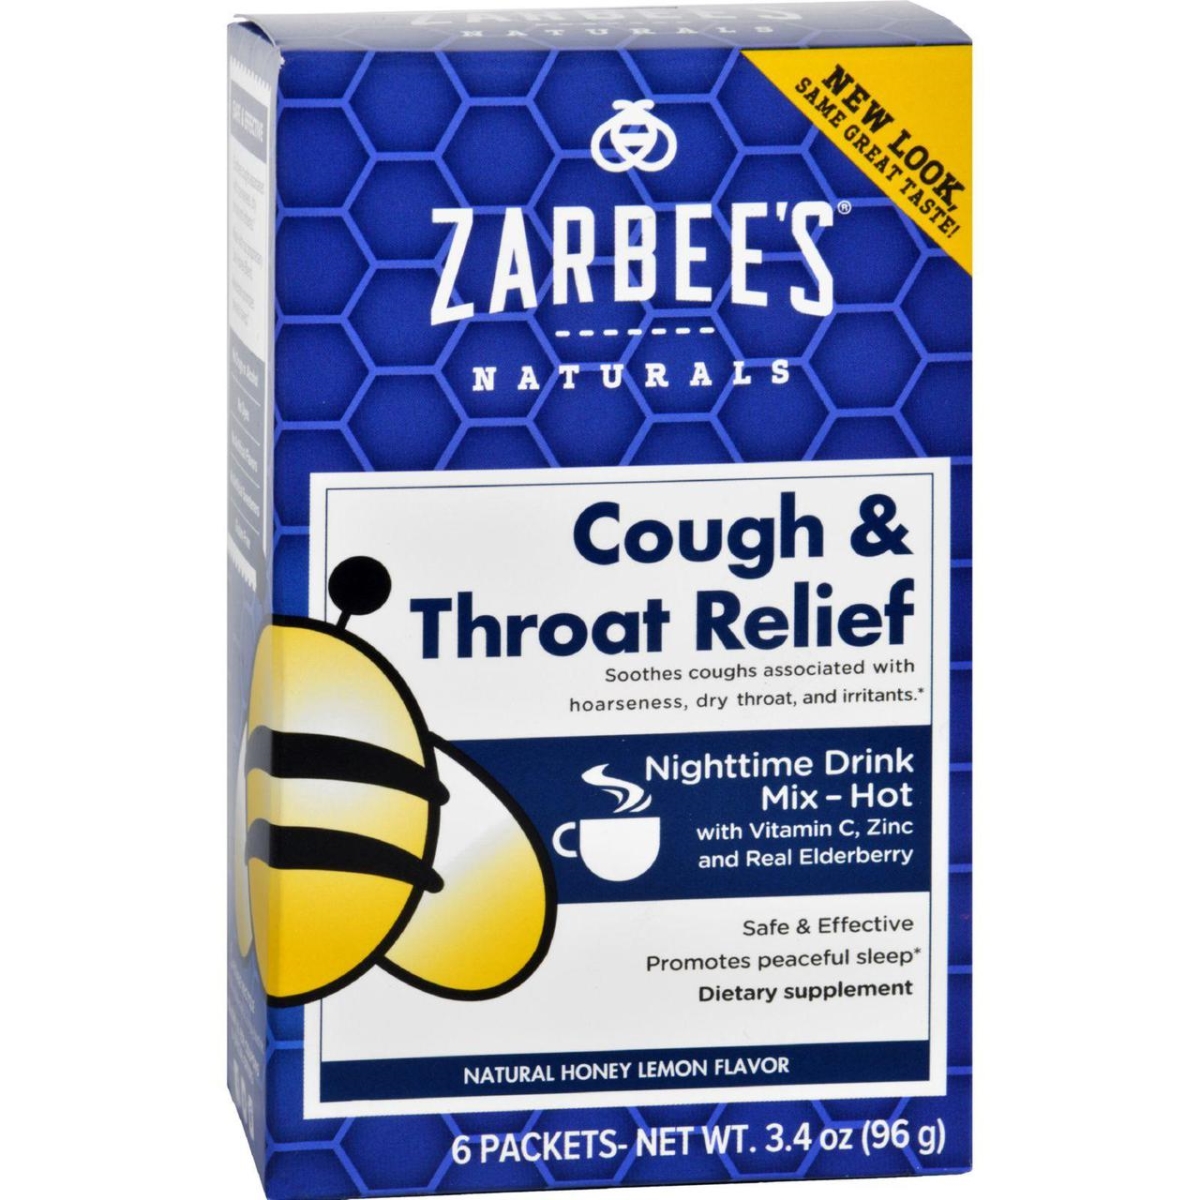 Hg1689850 Cough & Throat Relief Drink Mix - Nighttime Supplement - 6 Packets